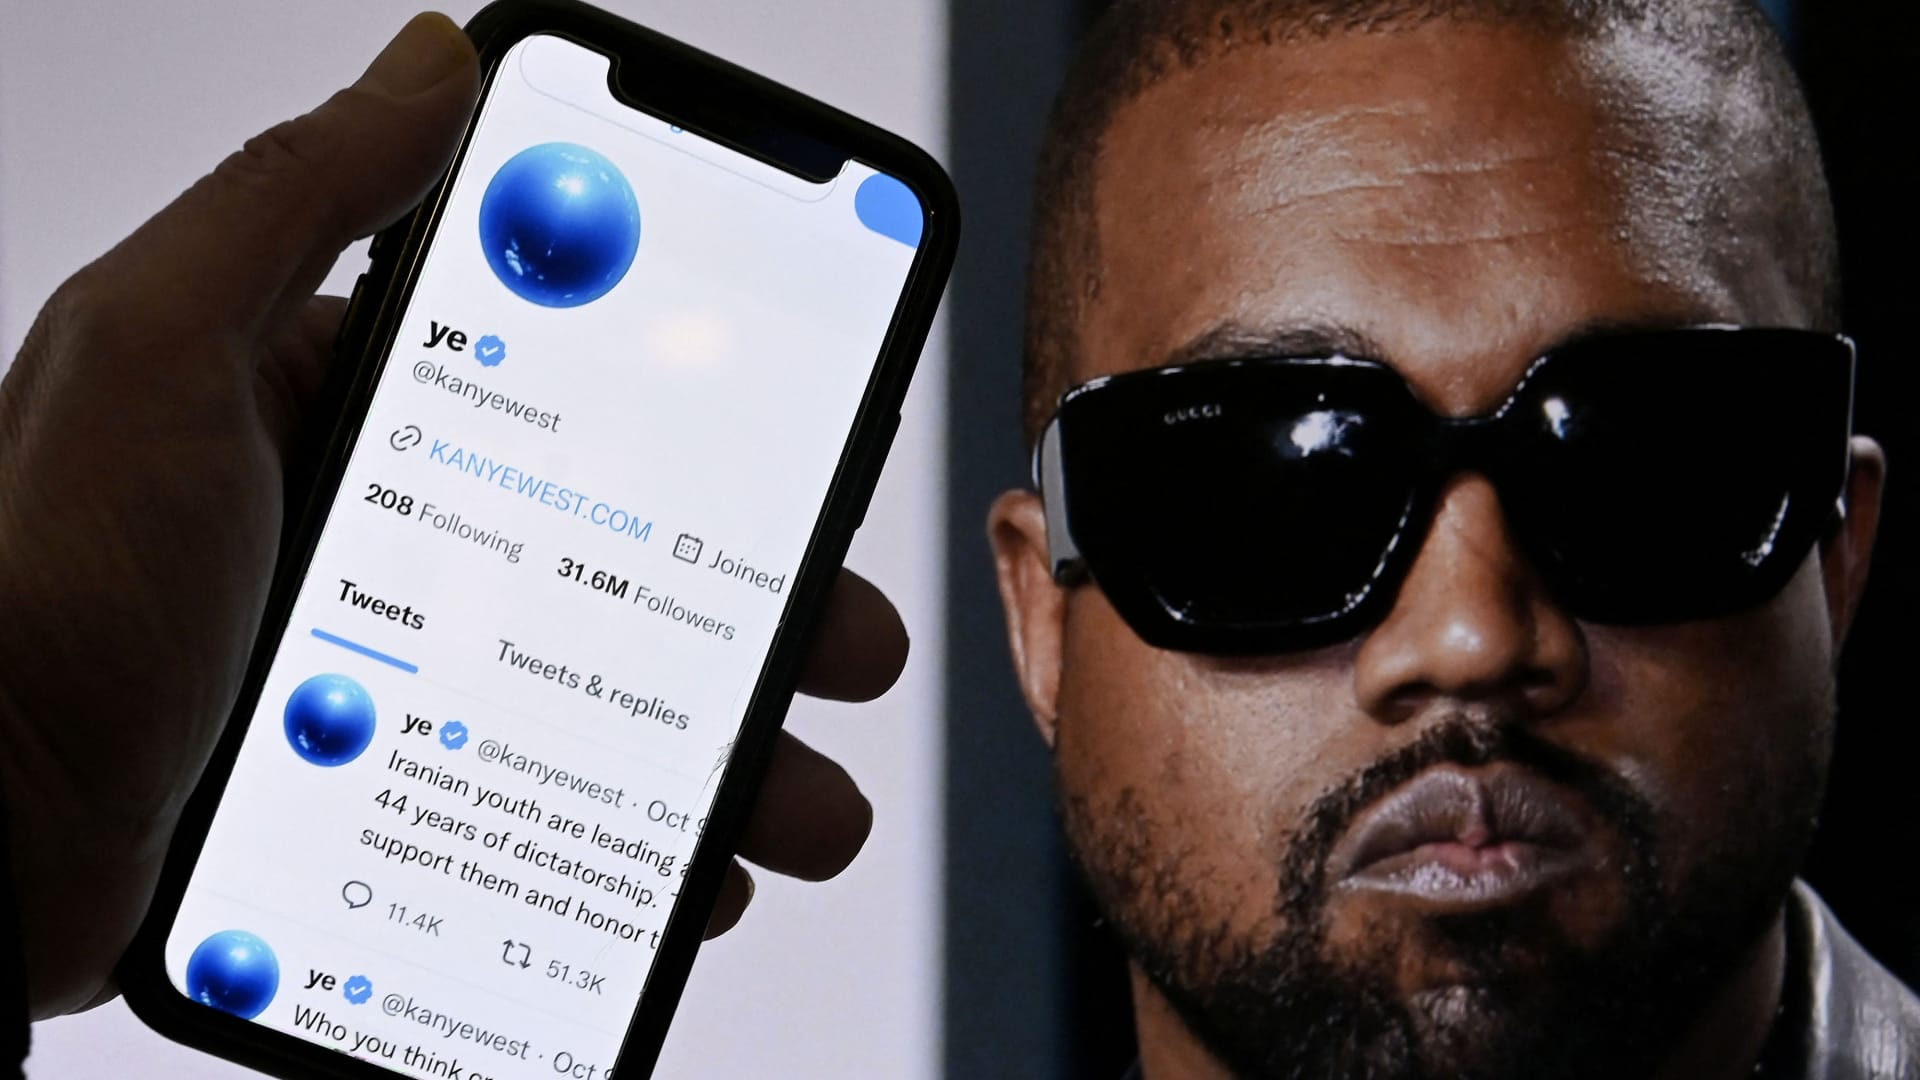 Kanye West returns to Twitter after restrictions for antisemitic posts